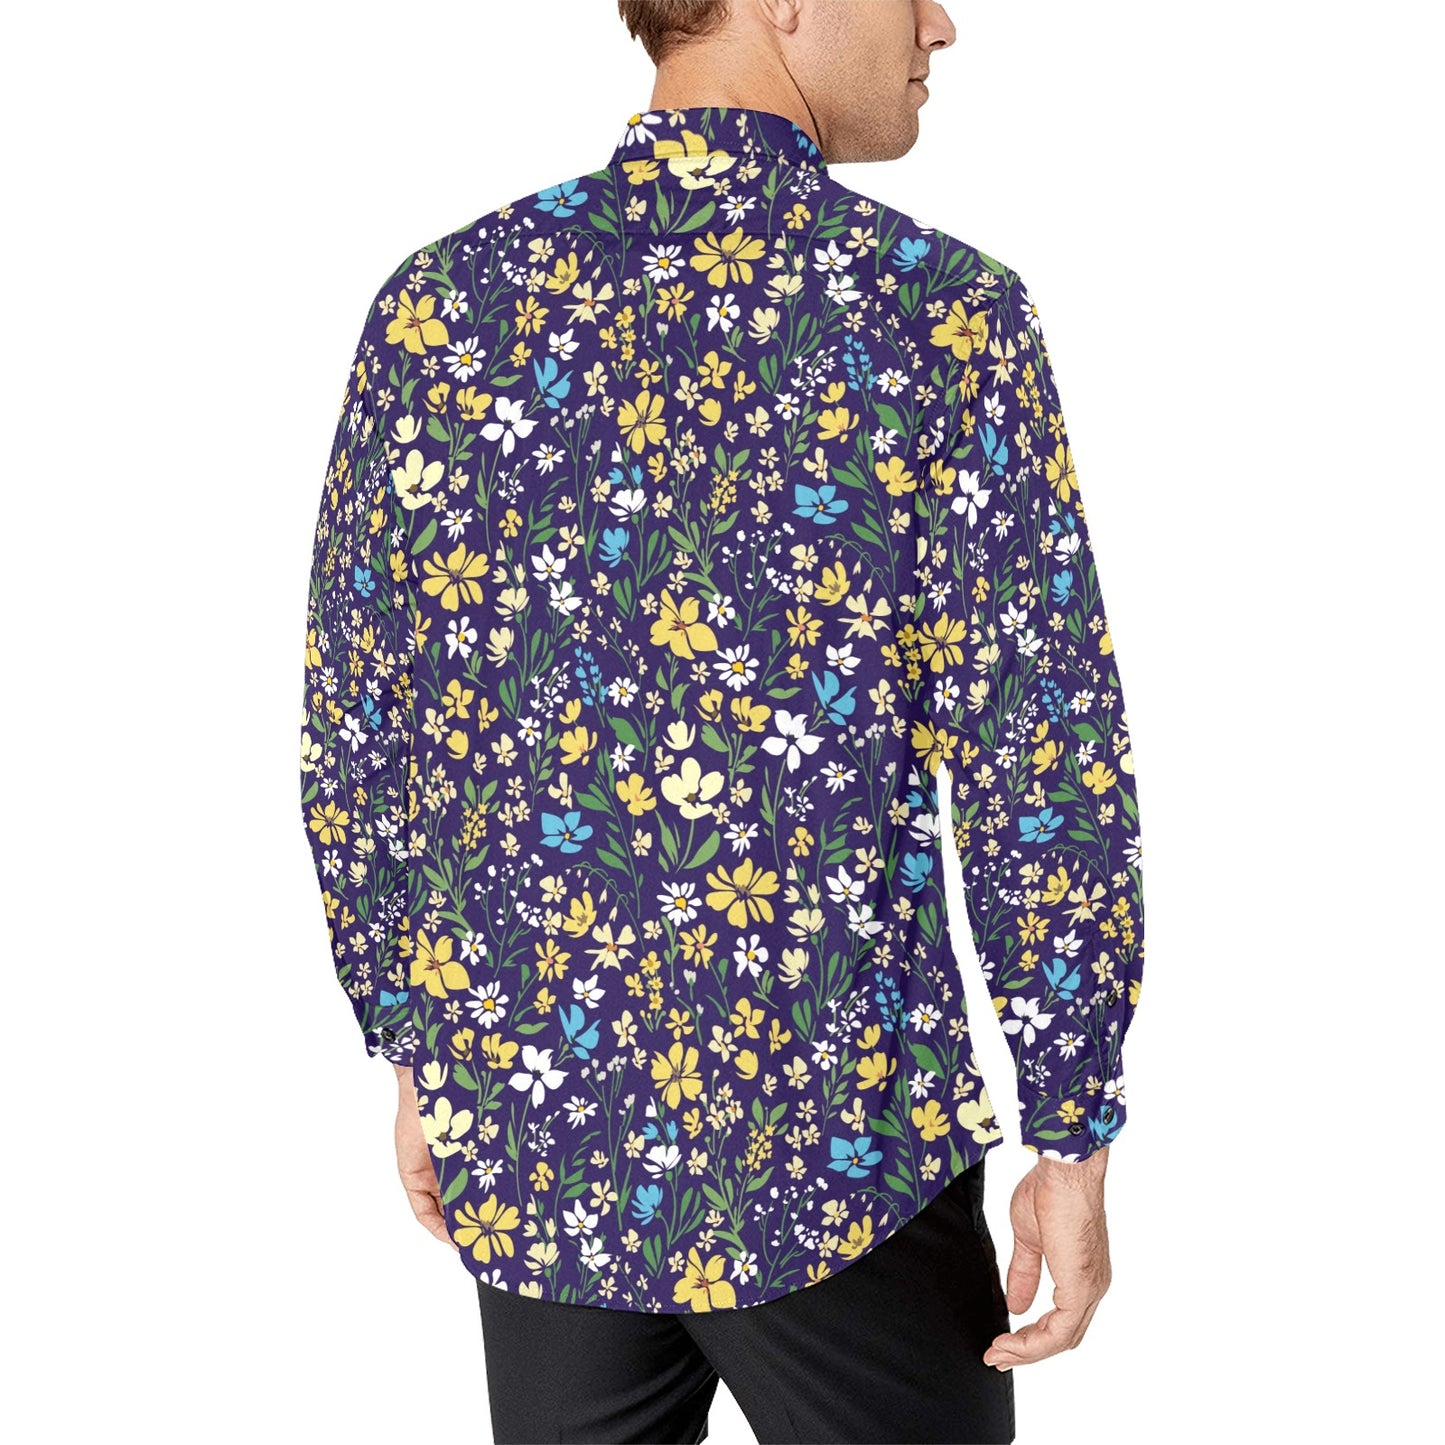 Floral Long Sleeve Men Button Up Shirt, Flowers Purple Print Casual Buttoned Collared Designer Dress Shirt with Chest Pocket